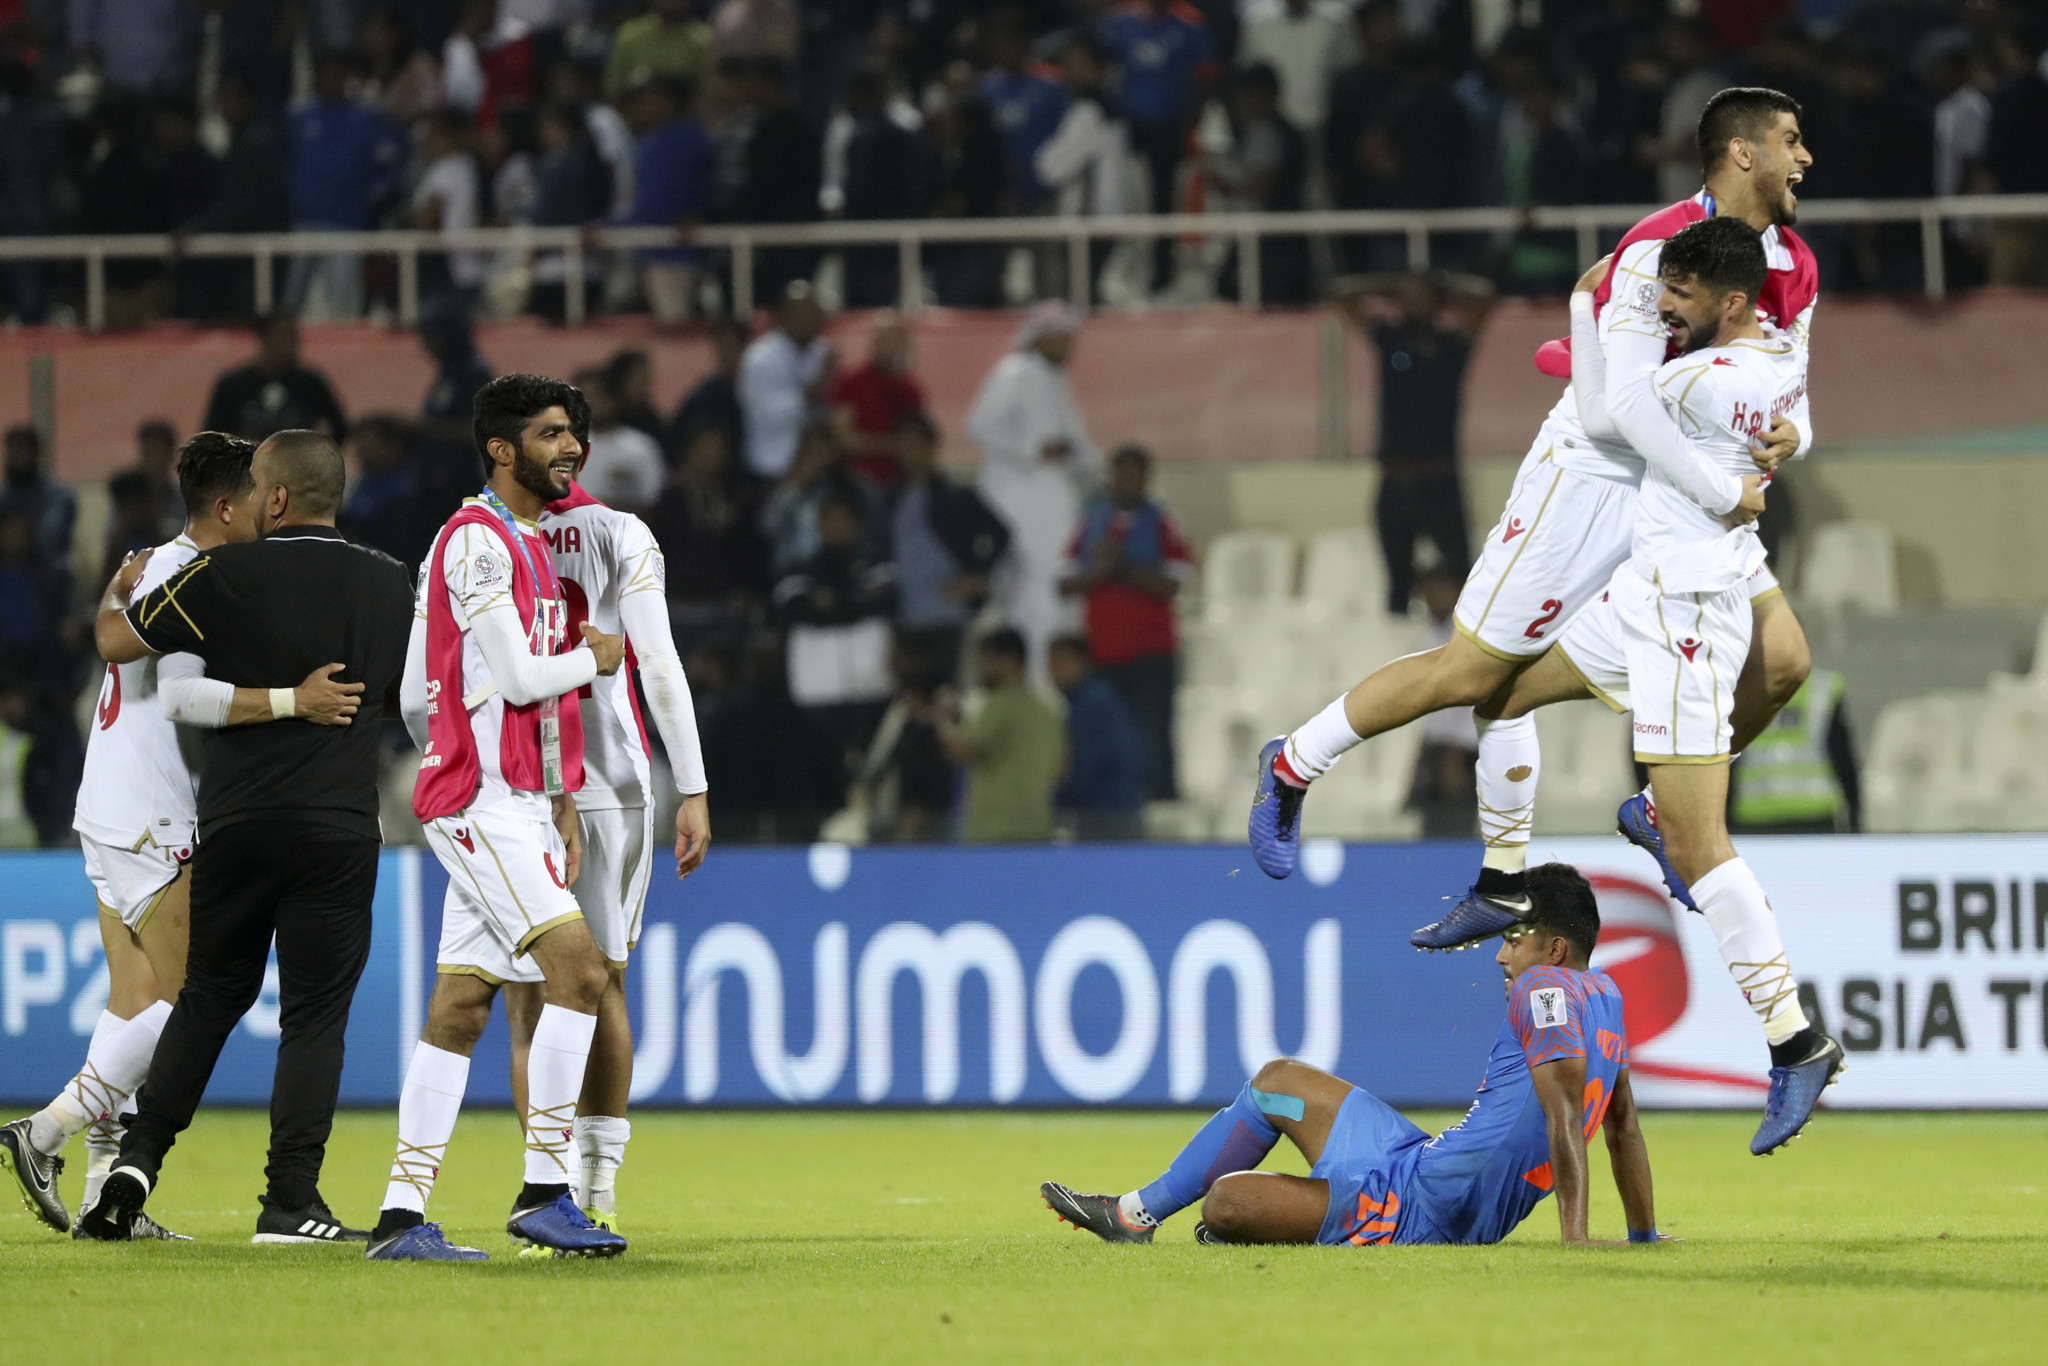 A 91st minute penalty for Bahrain has seen India knocked out of the 2019 Asian Cup ©Getty Images